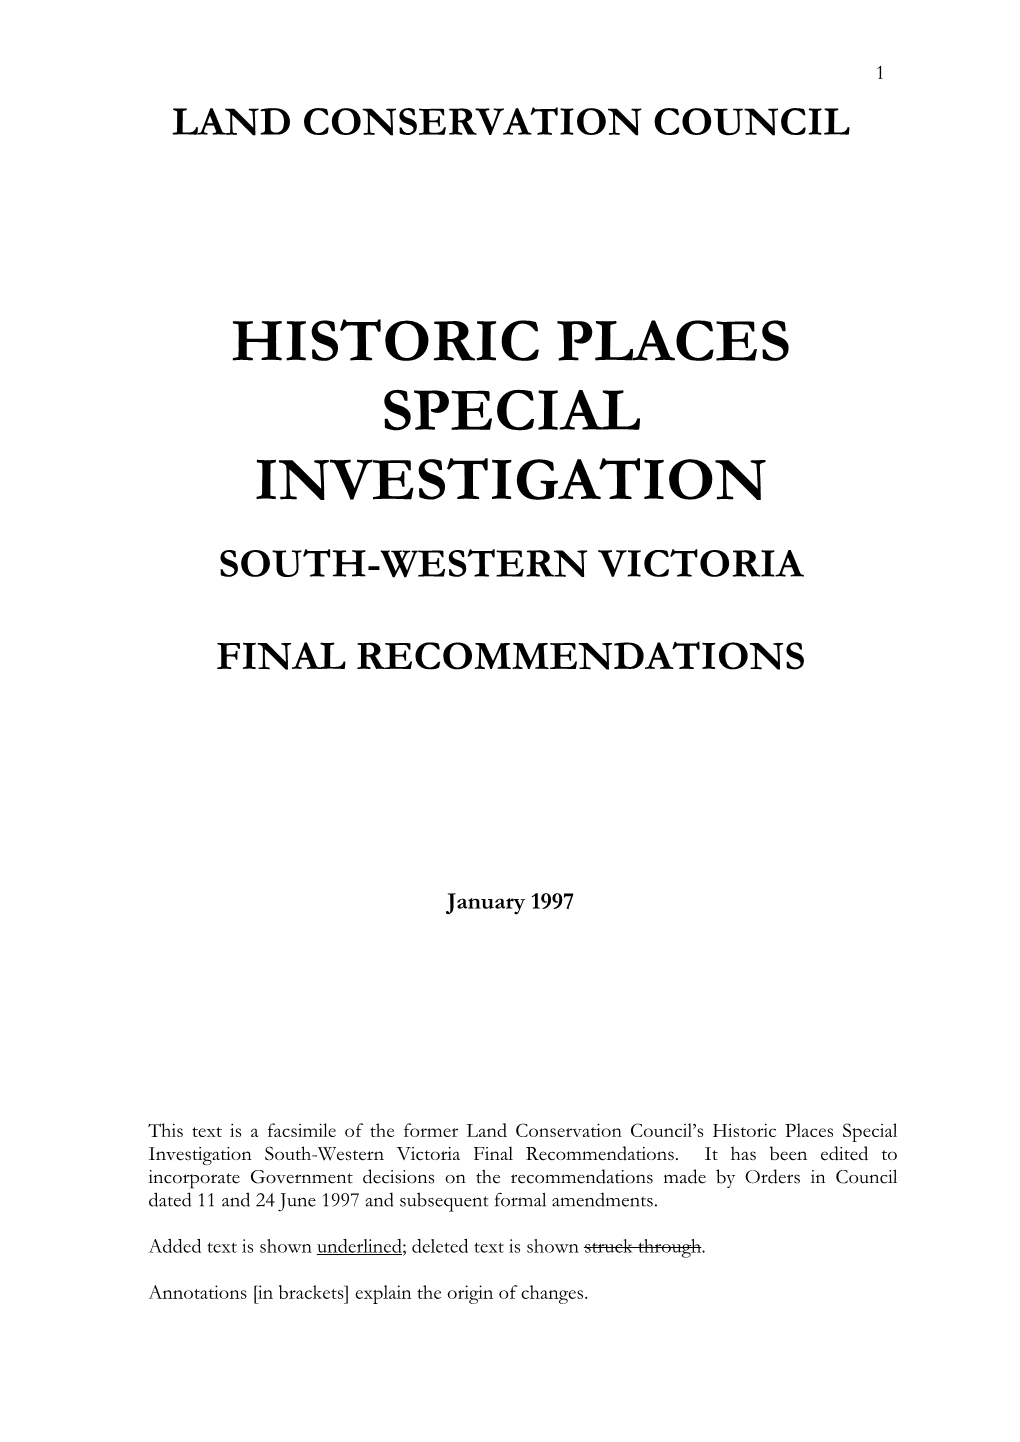 Historic Places Special Investigation South-Western Victoria